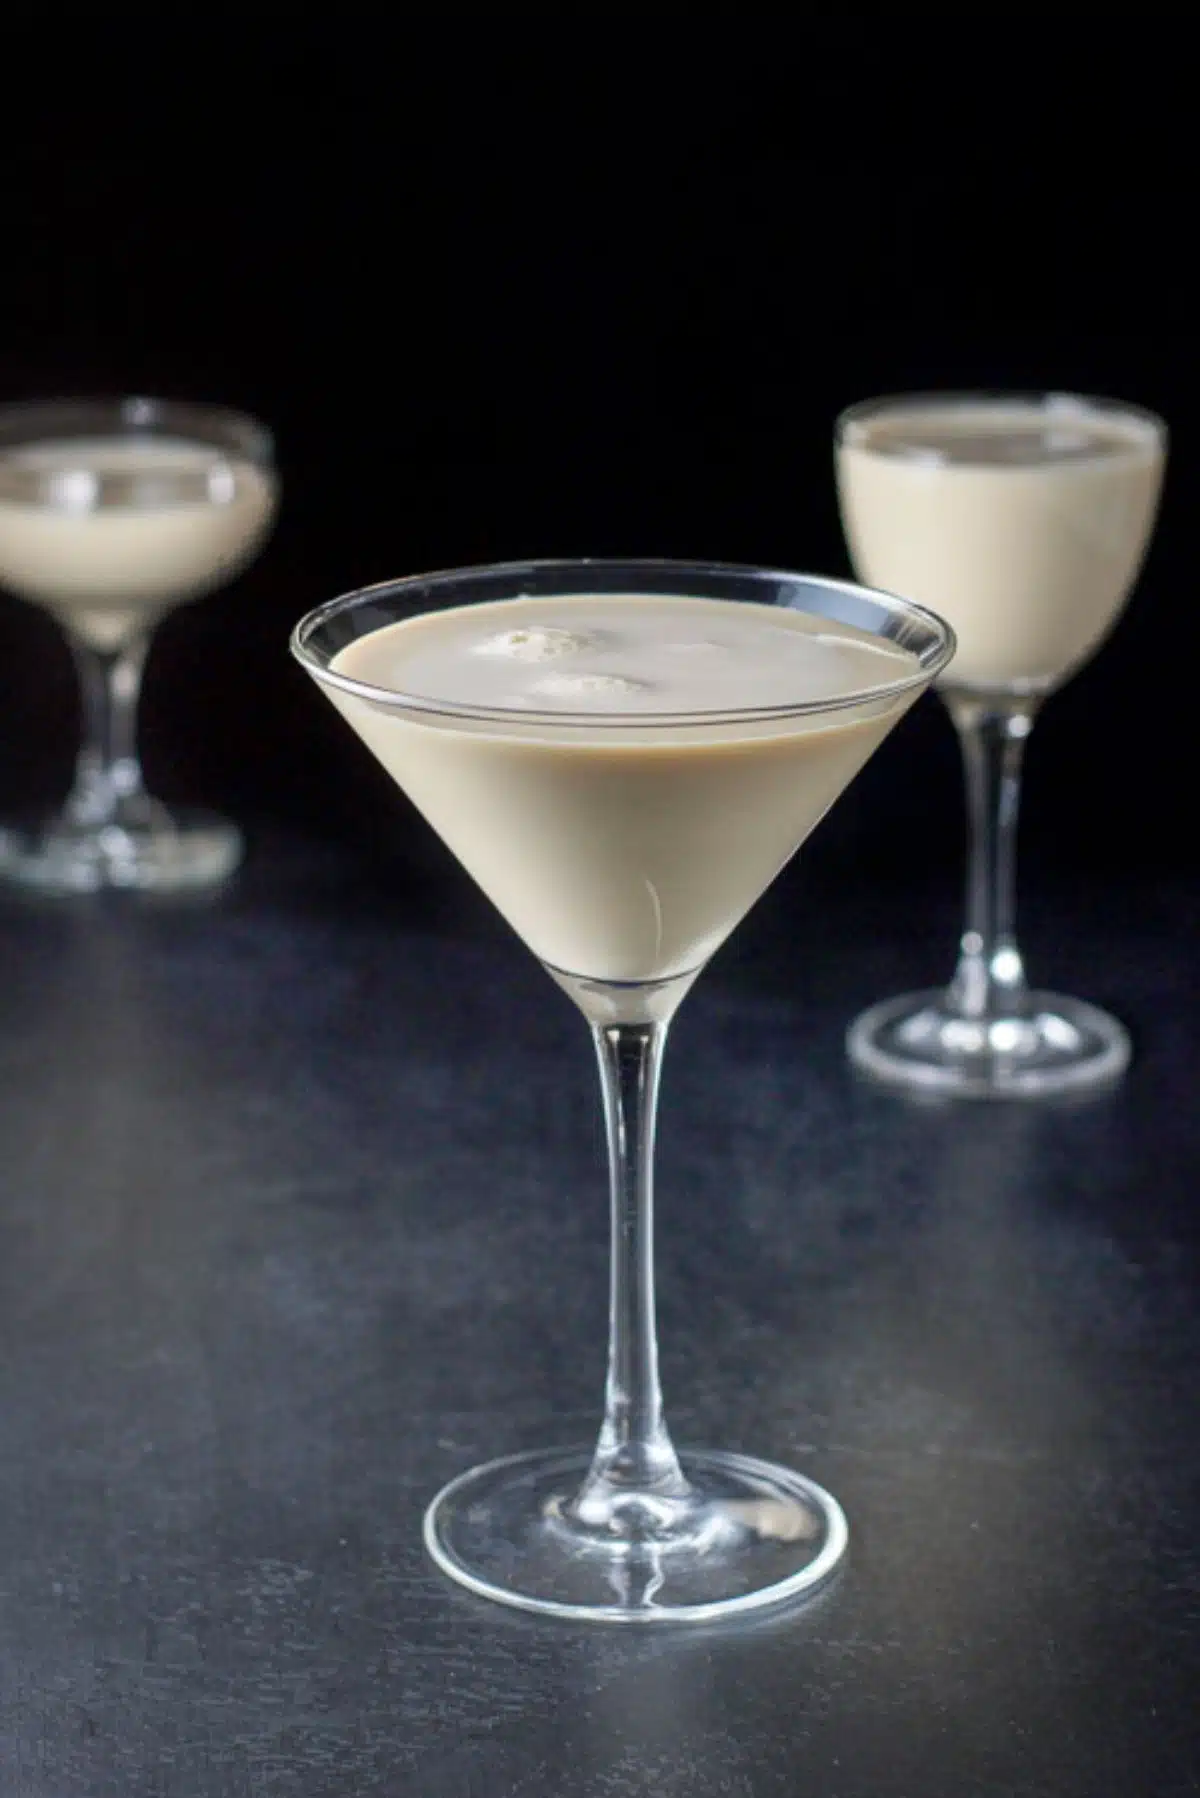 The creamy cocktail in three glasses. A classic glass, a coupe and a Nick and Nora glass